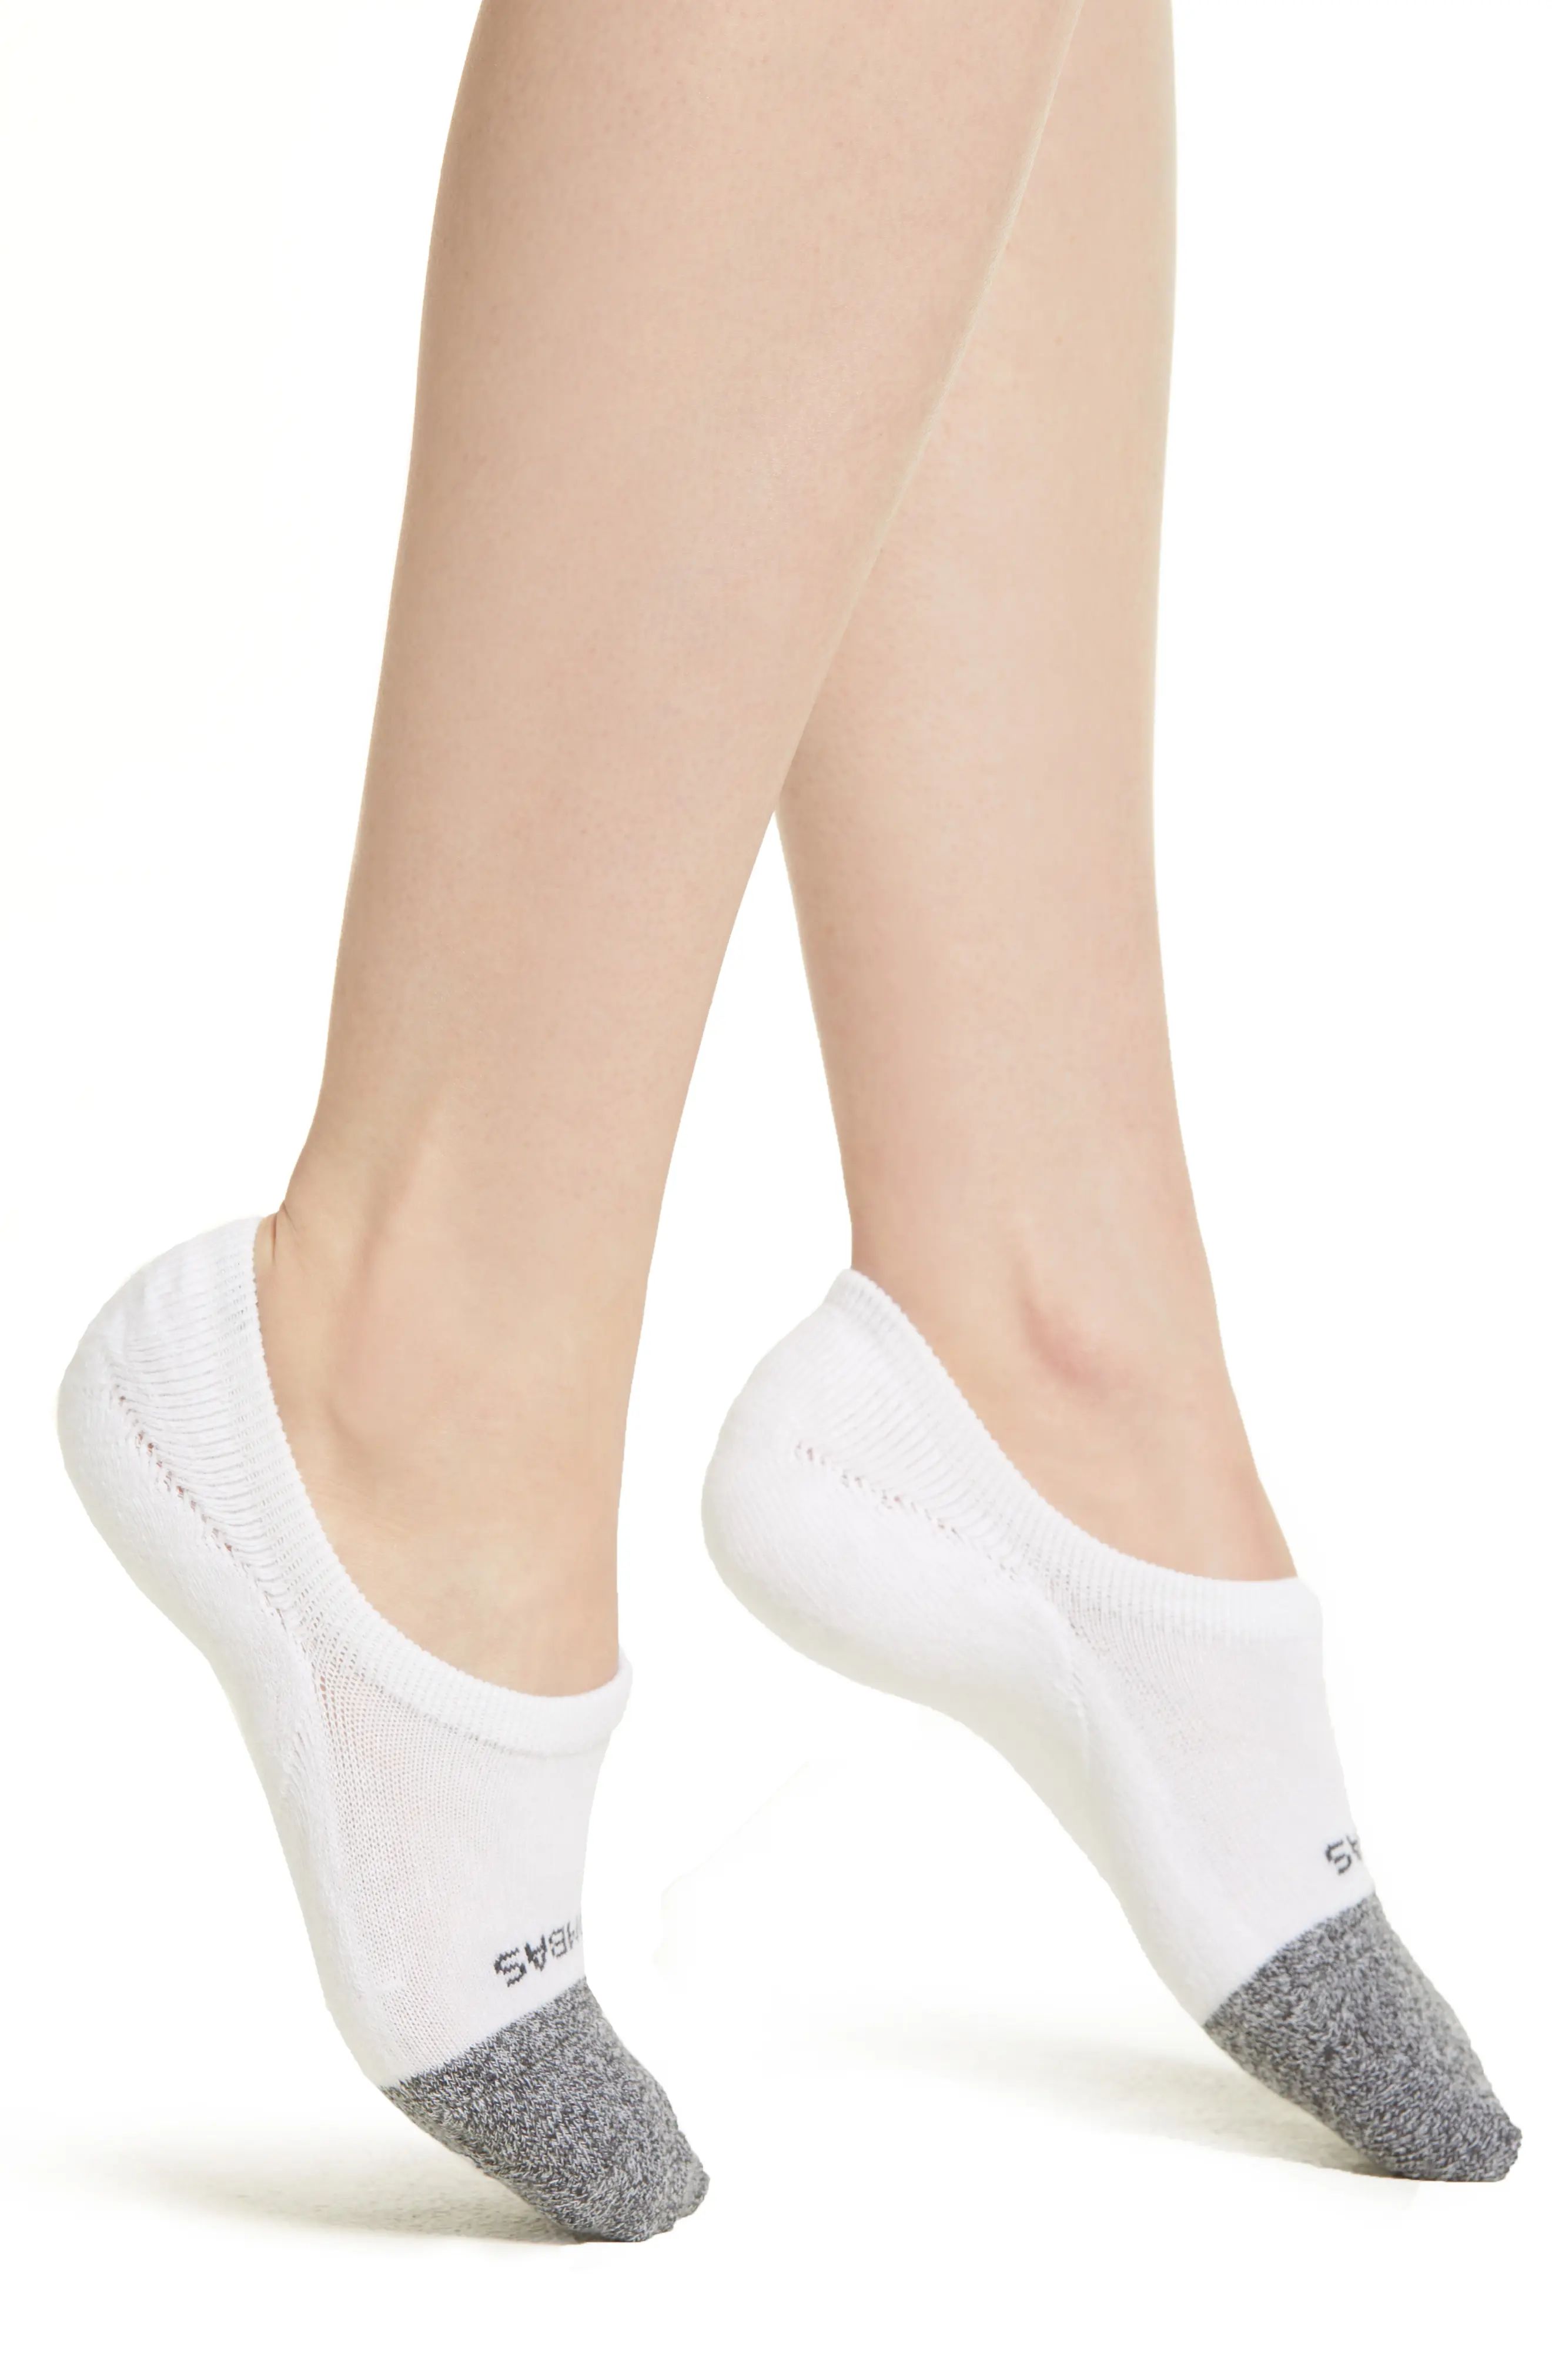 Bombas Cushioned No-Show Socks in White at Nordstrom, Size Medium | Nordstrom